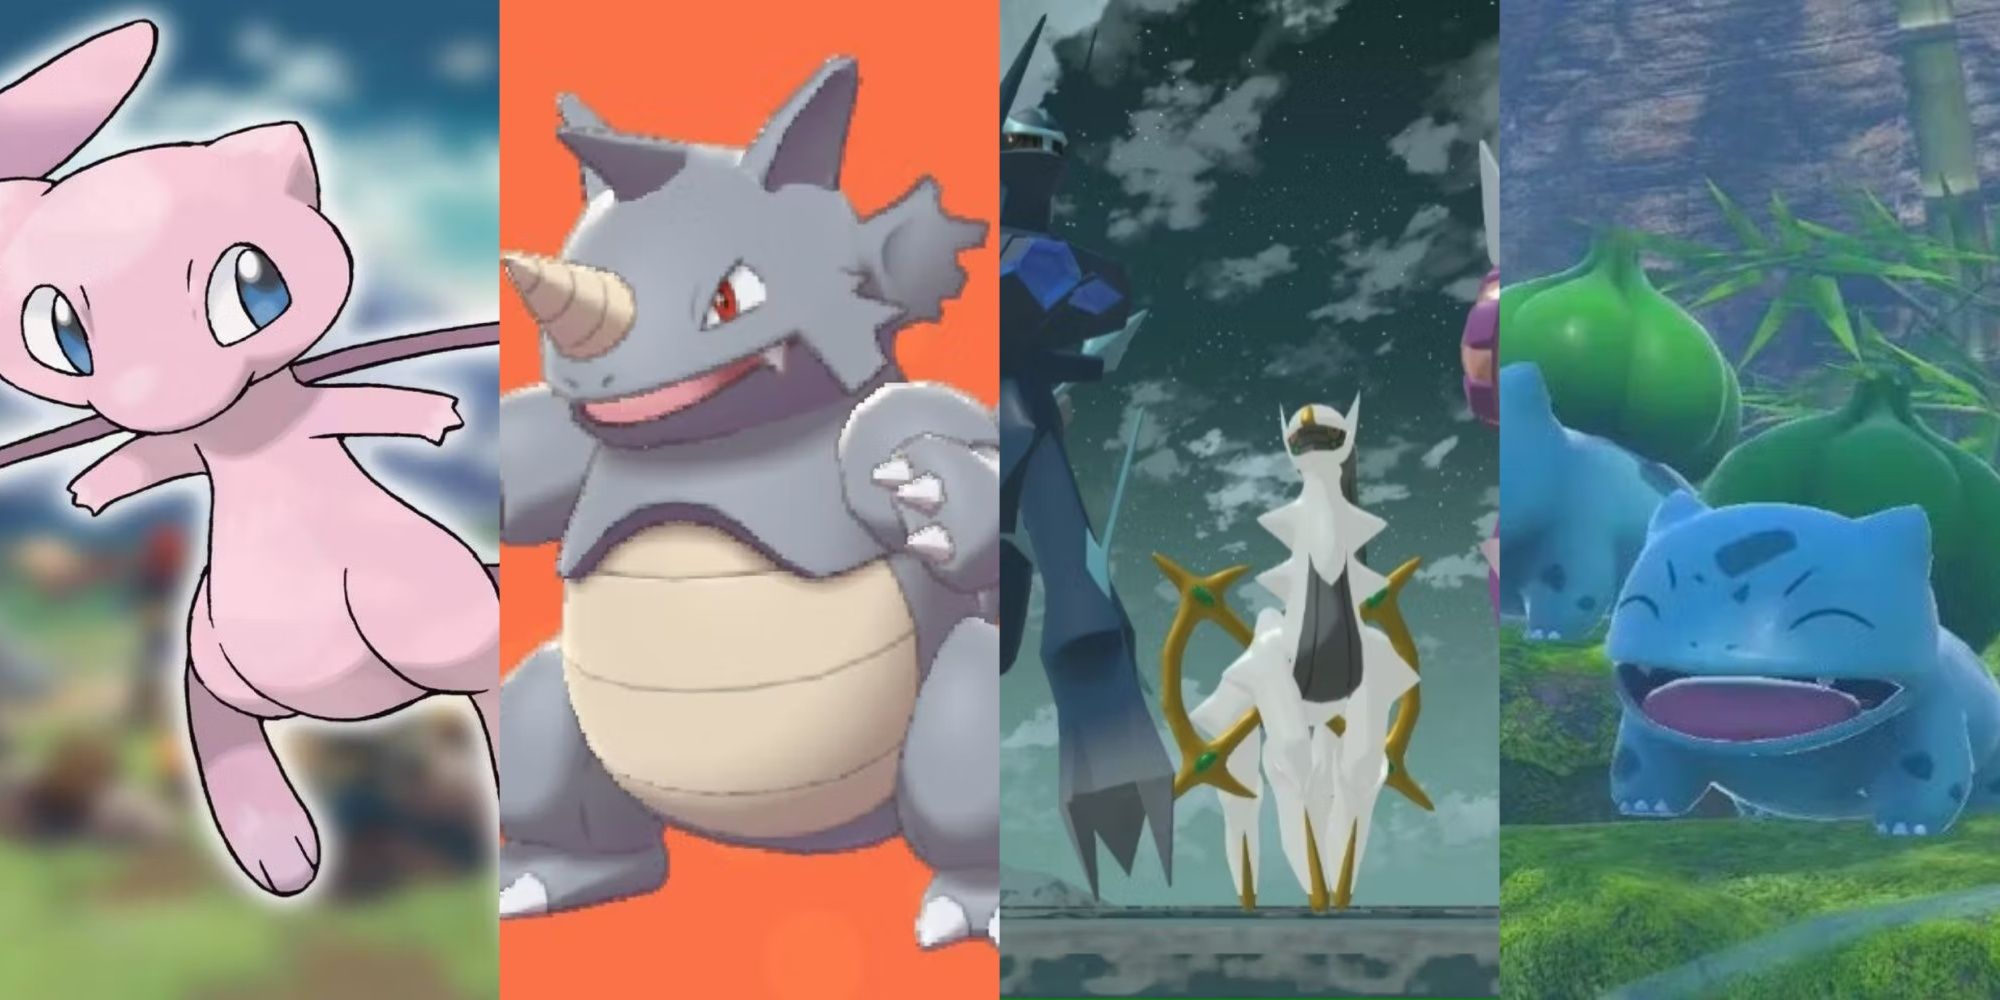 Pokemon Mew, Rhydon, Arceus, and a pair of Bulbasaur, left to right